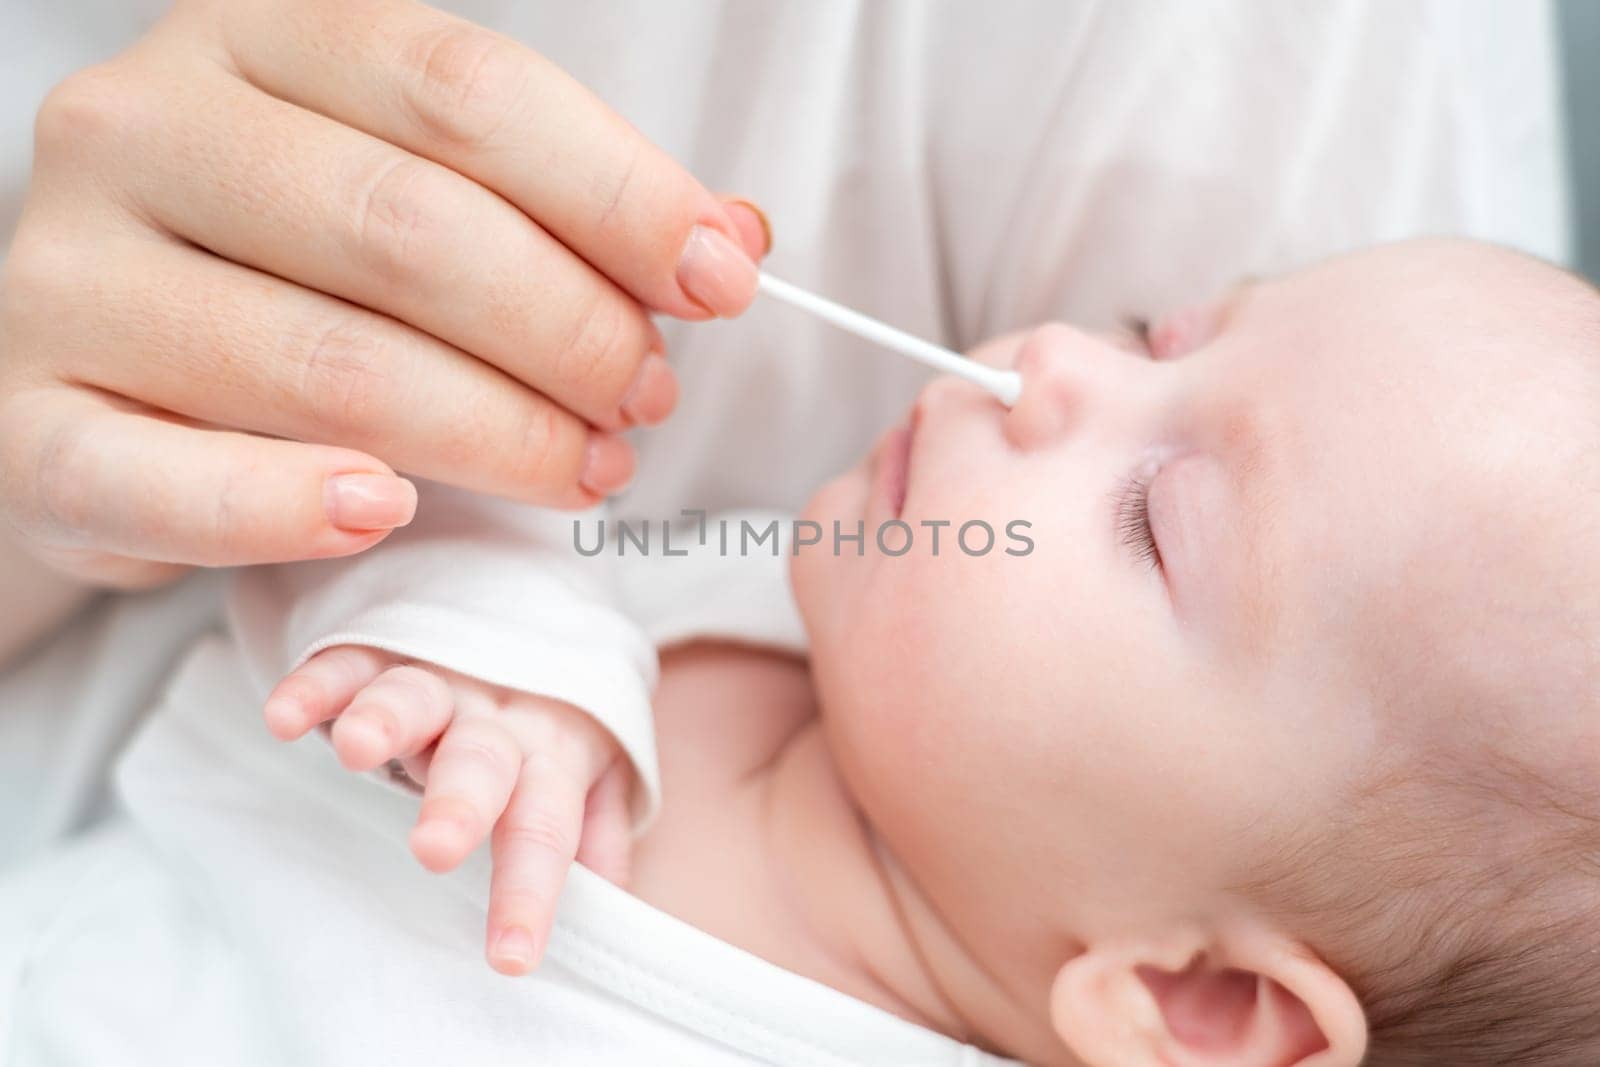 Mother applies age-old practices, cleaning her newborn's nose with soft precision and genuine